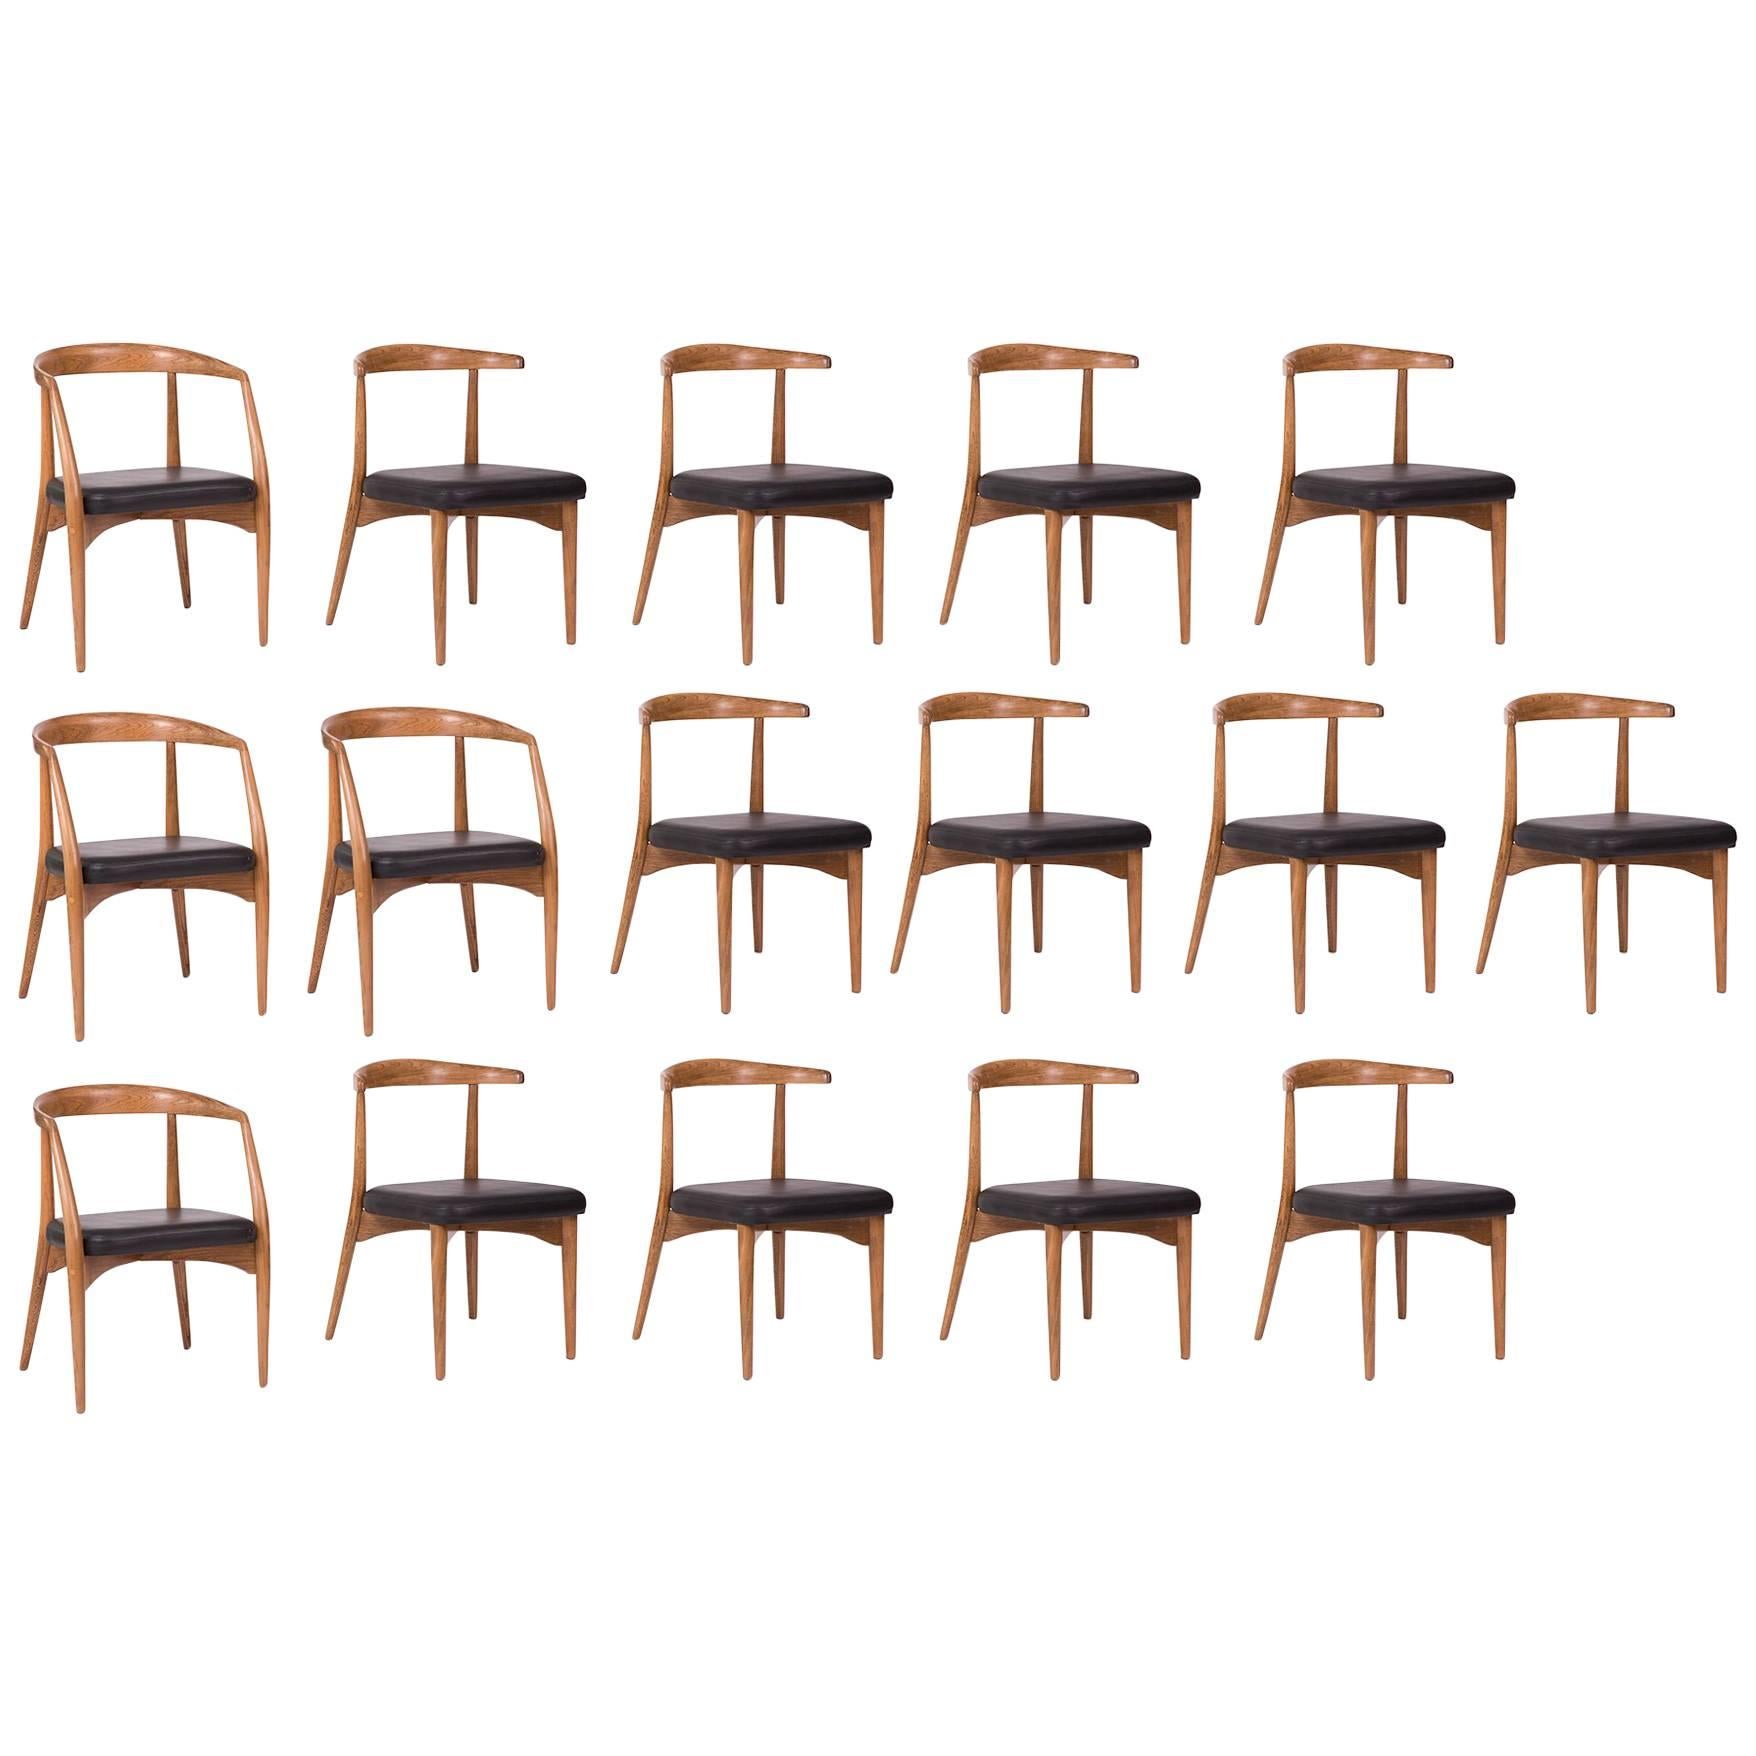 16 Lawrence Peabody Oak & Walnut Dining Chairs with Black Leather Seats